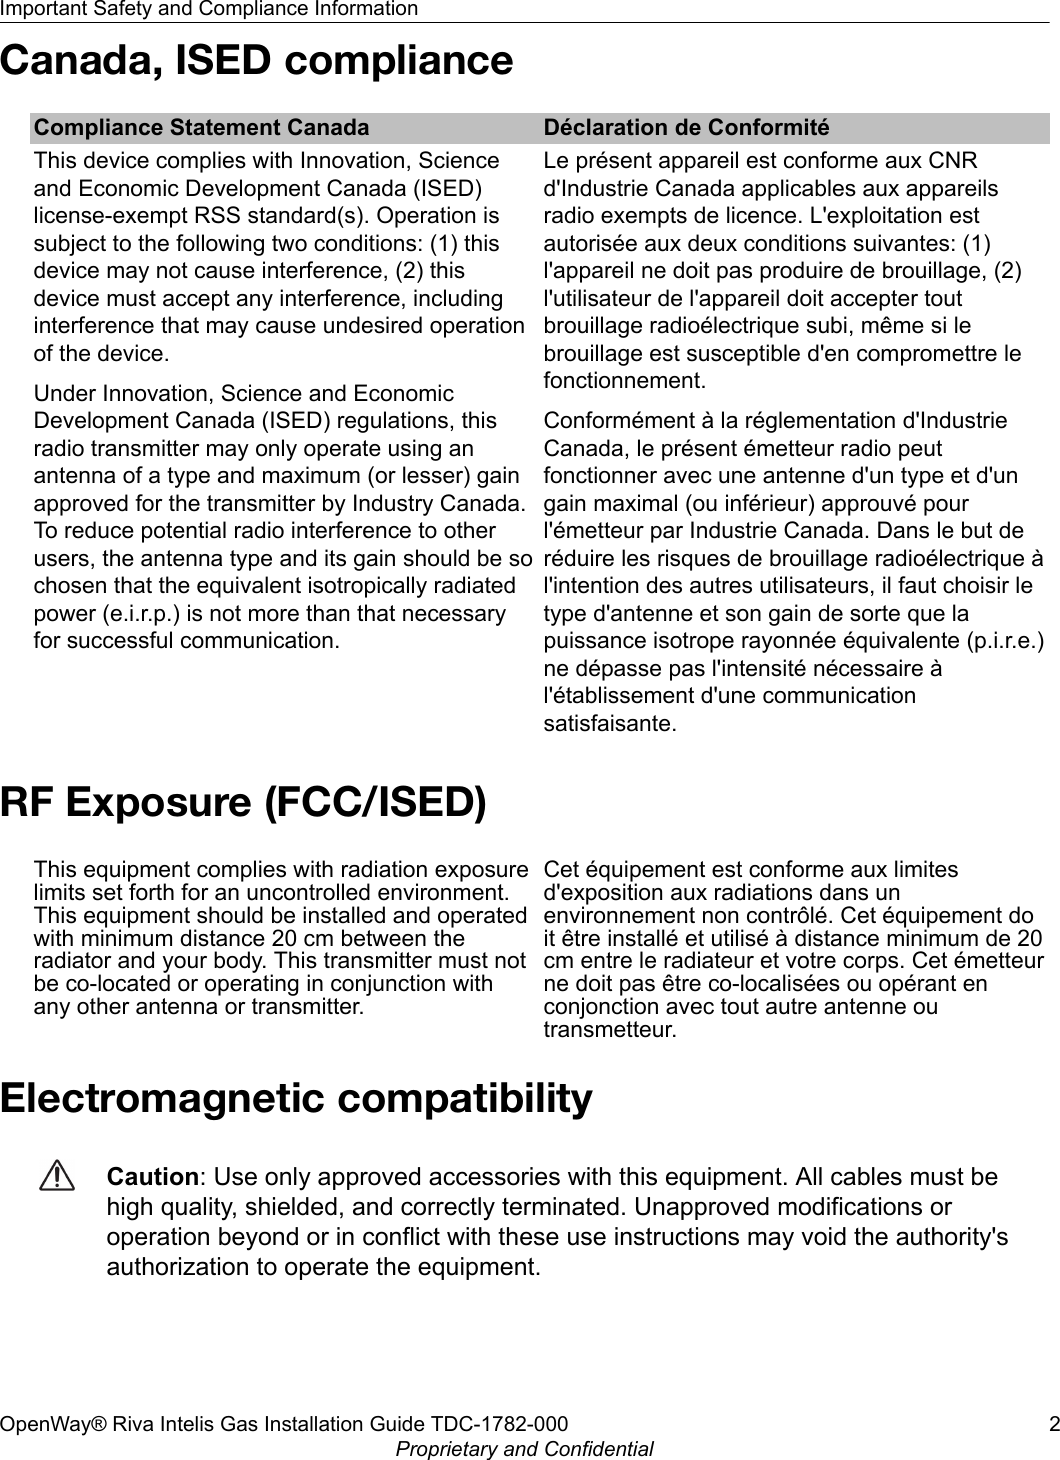 Canada, ISED complianceCompliance Statement Canada Déclaration de ConformitéThis device complies with Innovation, Scienceand Economic Development Canada (ISED)license-exempt RSS standard(s). Operation issubject to the following two conditions: (1) thisdevice may not cause interference, (2) thisdevice must accept any interference, includinginterference that may cause undesired operationof the device.Under Innovation, Science and EconomicDevelopment Canada (ISED) regulations, thisradio transmitter may only operate using anantenna of a type and maximum (or lesser) gainapproved for the transmitter by Industry Canada.To reduce potential radio interference to otherusers, the antenna type and its gain should be sochosen that the equivalent isotropically radiatedpower (e.i.r.p.) is not more than that necessaryfor successful communication.Le présent appareil est conforme aux CNRd&apos;Industrie Canada applicables aux appareilsradio exempts de licence. L&apos;exploitation estautorisée aux deux conditions suivantes: (1)l&apos;appareil ne doit pas produire de brouillage, (2)l&apos;utilisateur de l&apos;appareil doit accepter toutbrouillage radioélectrique subi, même si lebrouillage est susceptible d&apos;en compromettre lefonctionnement.Conformément à la réglementation d&apos;IndustrieCanada, le présent émetteur radio peutfonctionner avec une antenne d&apos;un type et d&apos;ungain maximal (ou inférieur) approuvé pourl&apos;émetteur par Industrie Canada. Dans le but deréduire les risques de brouillage radioélectrique àl&apos;intention des autres utilisateurs, il faut choisir letype d&apos;antenne et son gain de sorte que lapuissance isotrope rayonnée équivalente (p.i.r.e.)ne dépasse pas l&apos;intensité nécessaire àl&apos;établissement d&apos;une communicationsatisfaisante.RF Exposure (FCC/ISED)This equipment complies with radiation exposurelimits set forth for an uncontrolled environment.This equipment should be installed and operatedwith minimum distance 20 cm between theradiator and your body. This transmitter must notbe co-located or operating in conjunction withany other antenna or transmitter.Cet équipement est conforme aux limitesd&apos;exposition aux radiations dans unenvironnement non contrôlé. Cet équipement doit être installé et utilisé à distance minimum de 20cm entre le radiateur et votre corps. Cet émetteurne doit pas être co-localisées ou opérant enconjonction avec tout autre antenne outransmetteur.Electromagnetic compatibilityCaution: Use only approved accessories with this equipment. All cables must behigh quality, shielded, and correctly terminated. Unapproved modifications oroperation beyond or in conflict with these use instructions may void the authority&apos;sauthorization to operate the equipment.Important Safety and Compliance InformationOpenWay® Riva Intelis Gas Installation Guide TDC-1782-000 2Proprietary and Confidential